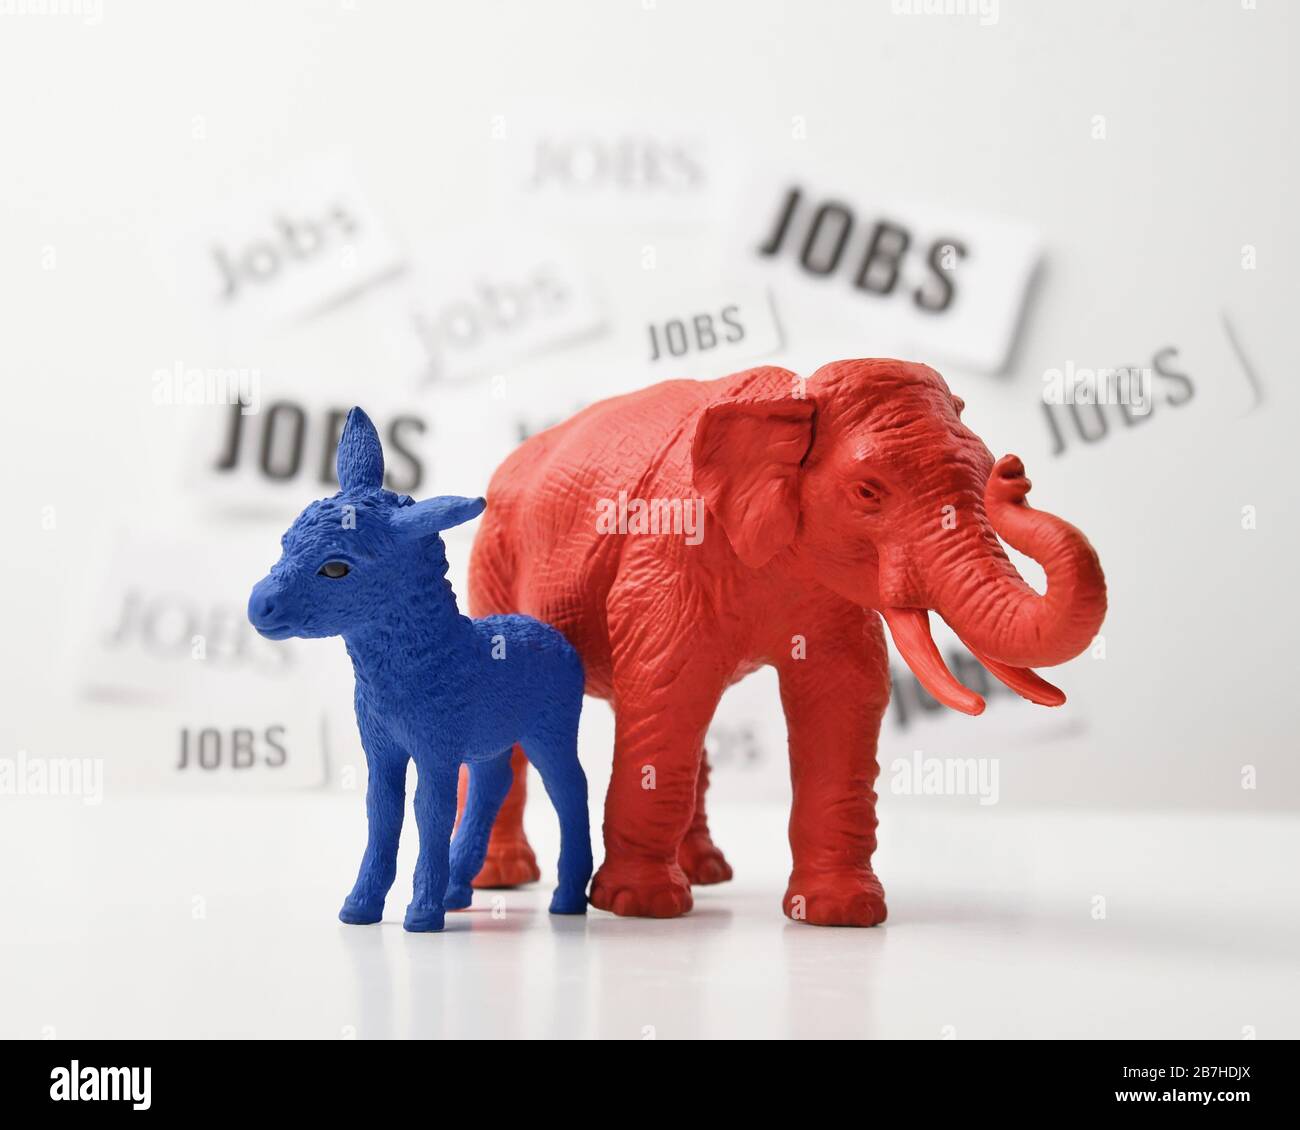 A blue donkey and a red elephant are against a white wall that has job text in the background for a 2020 political issue of employment rate. Stock Photo